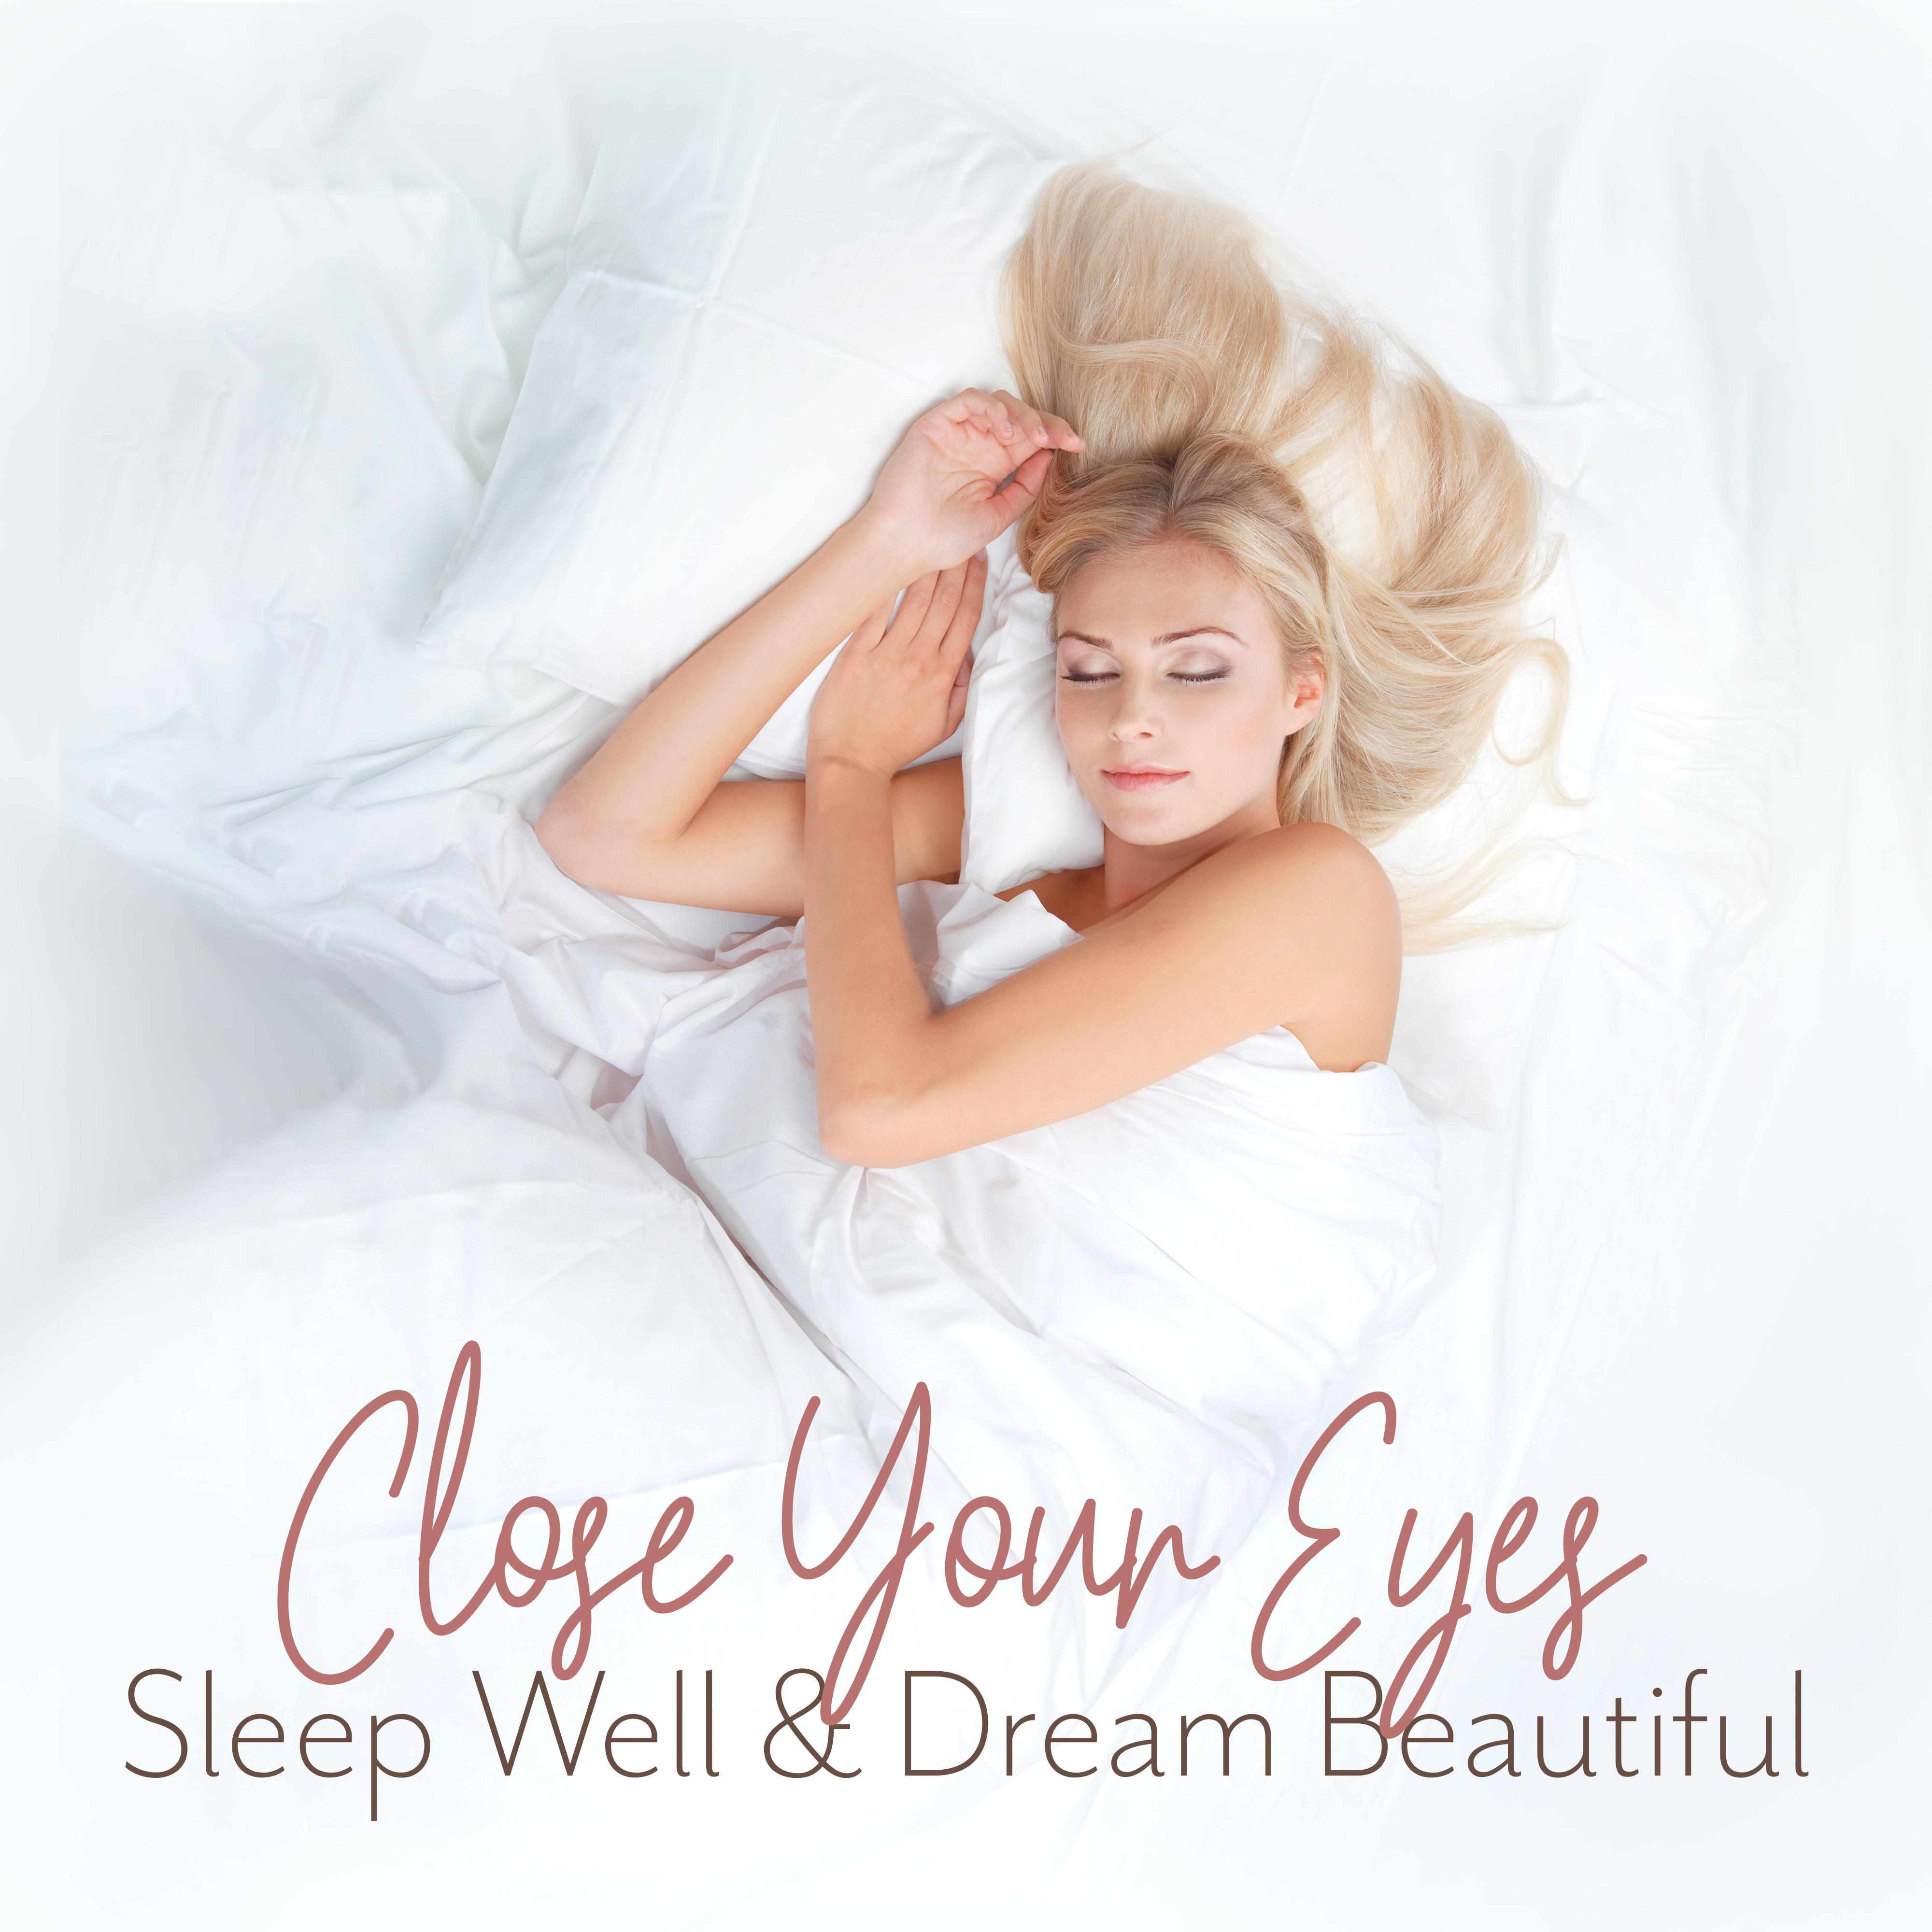 Close Your Eyes, Sleep Well & Dream Beautiful – 2019 New Age Music Created to Help You Fall Asleep, Cure Insomnia, Rest & Relax, Dream Beautiful, Sleep Perfectly